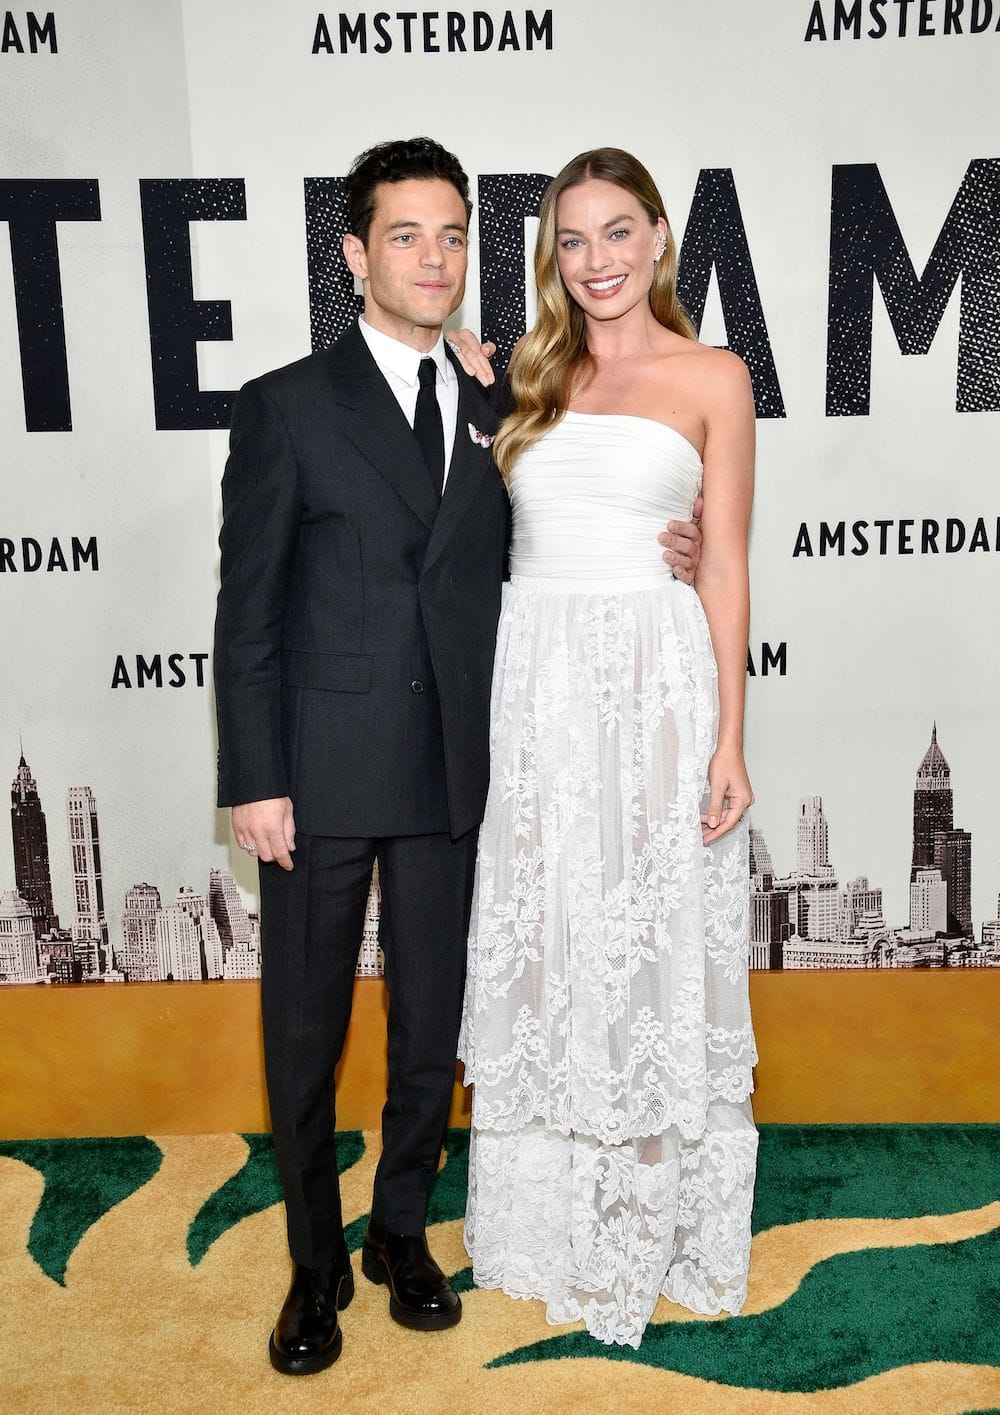 Margot Robbie in Chanel with Rami Malek at  ‘Amsterdam’ World Premiere in NYC